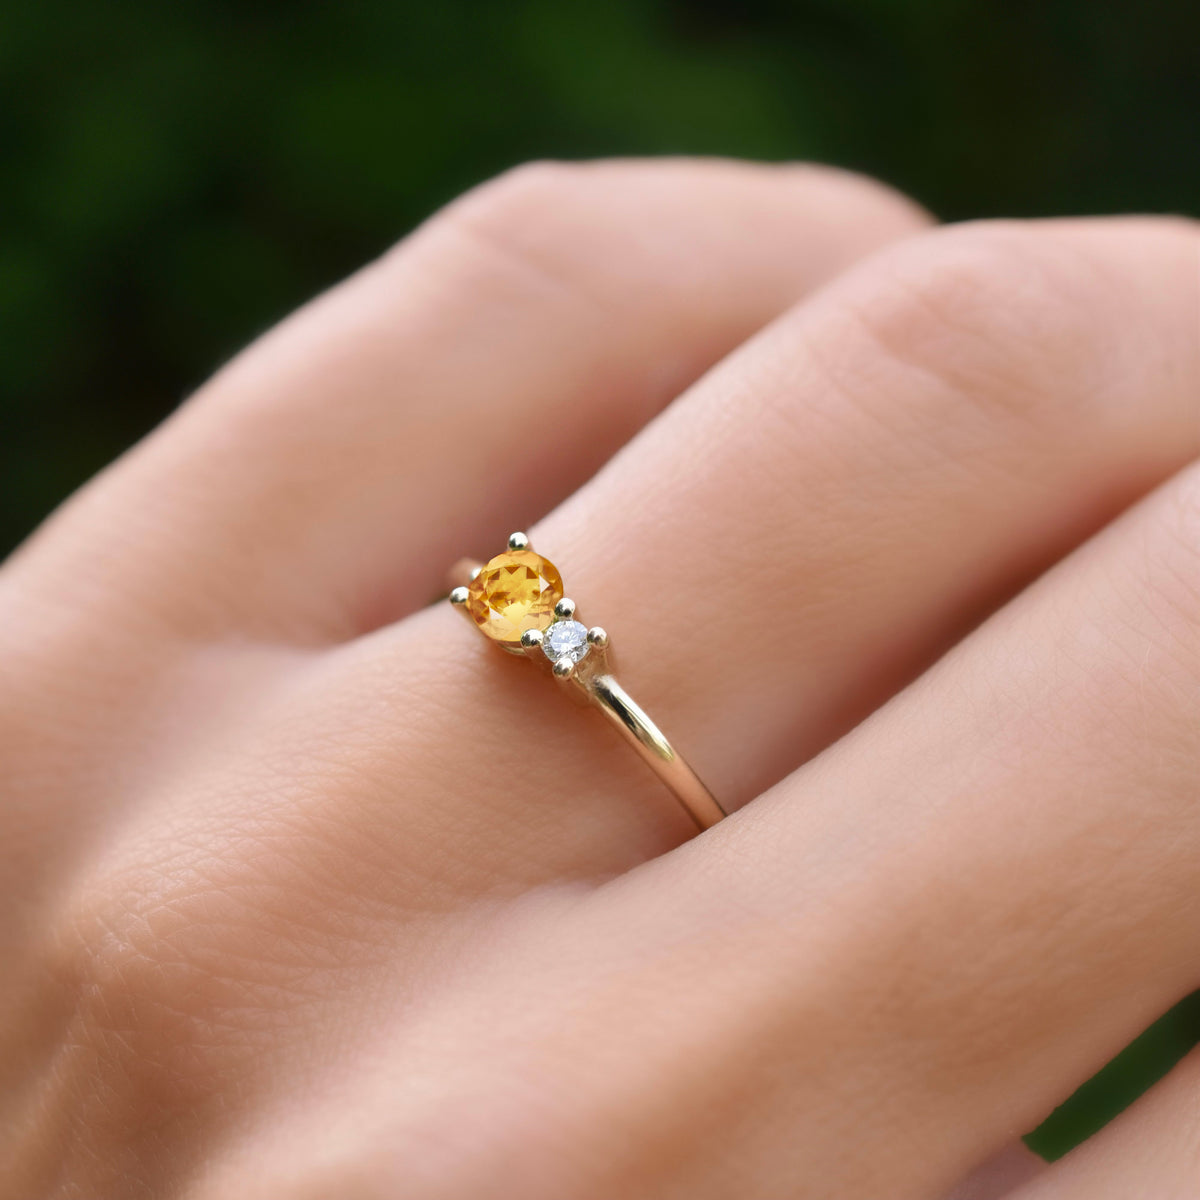 One Lady's 14 Karat White Gold Solitare Engagement Ring With A 4-Prong -  Unique Gold & Diamonds